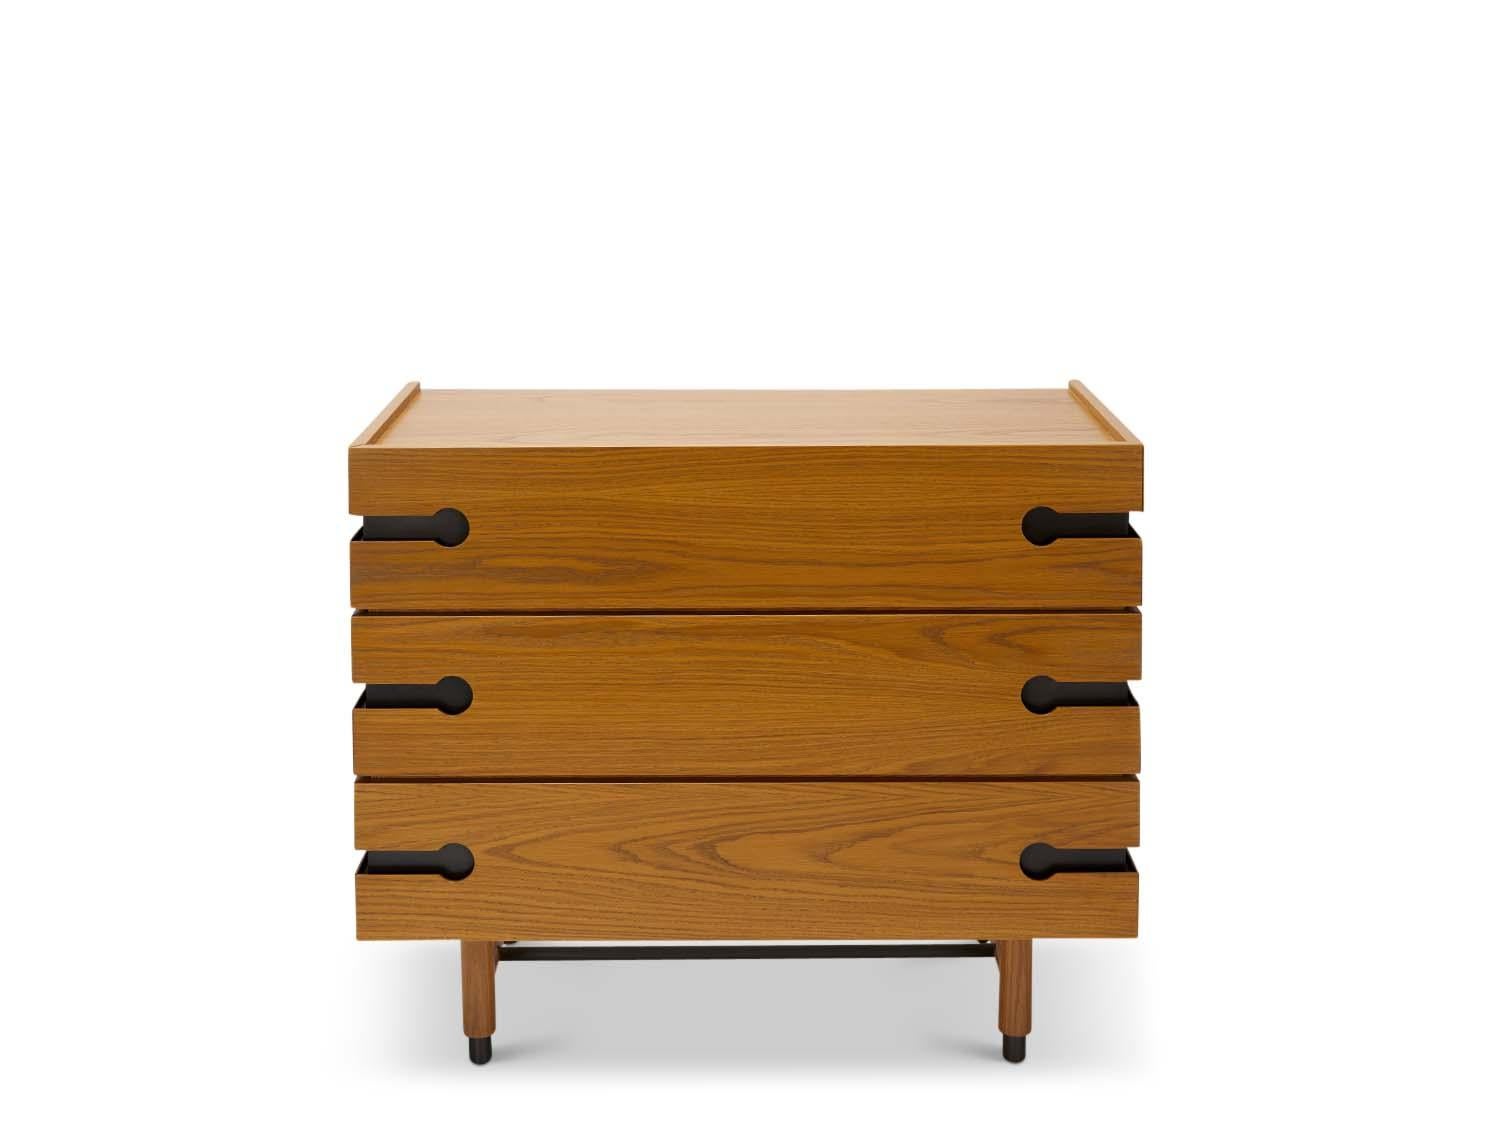 The Niguel dresser features 3 drawers, brass cap feet, and brass inlaid details.

The Lawson-Fenning Collection is designed and handmade in Los Angeles, California. Reach out to discover what options are currently in stock.